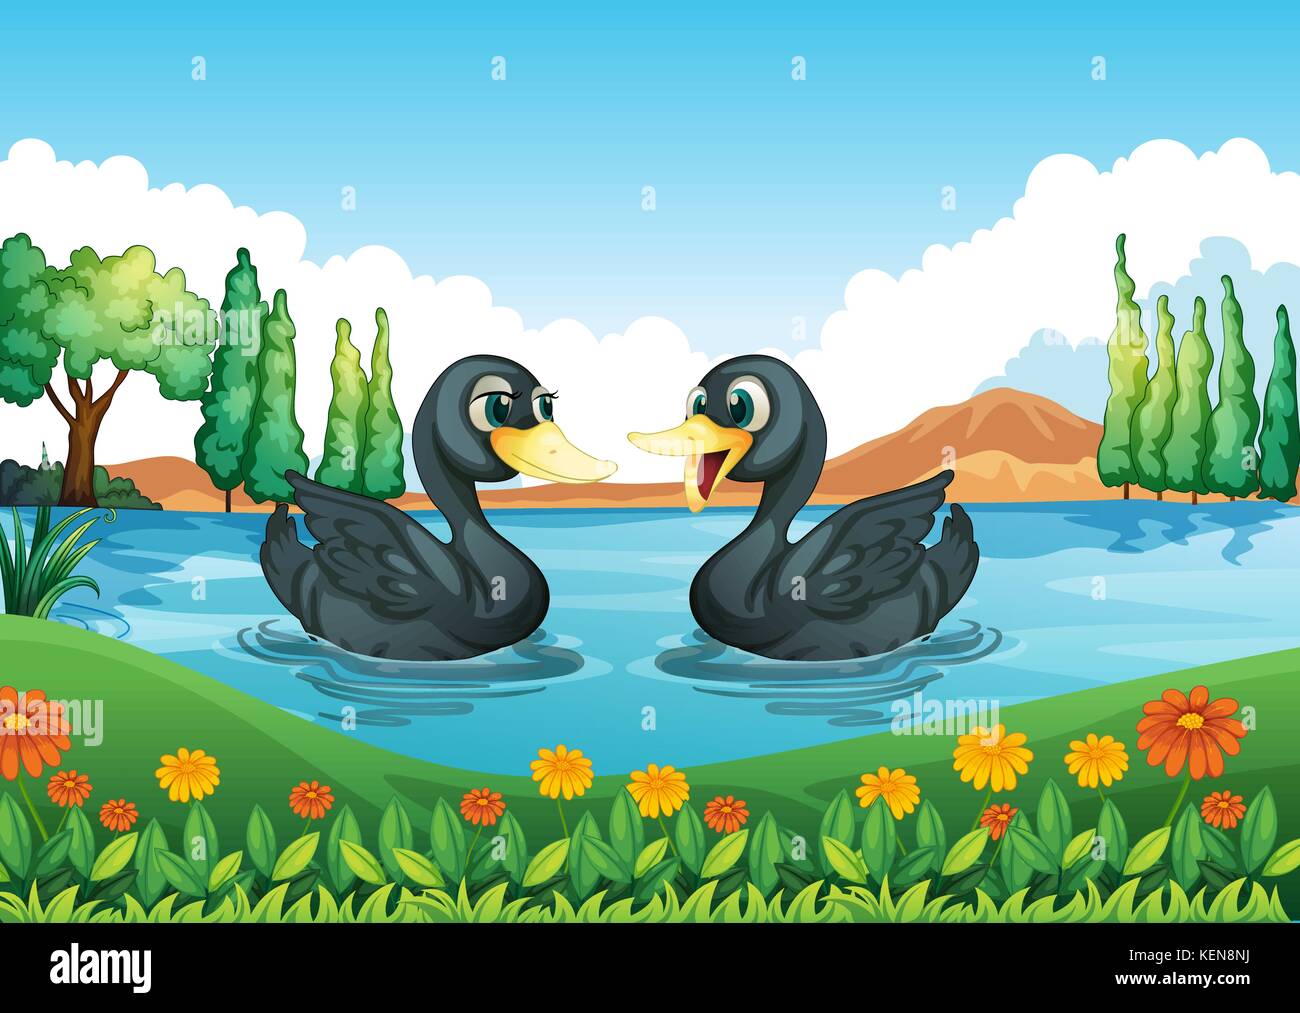 Illustration of a river with two ducks Stock Vector